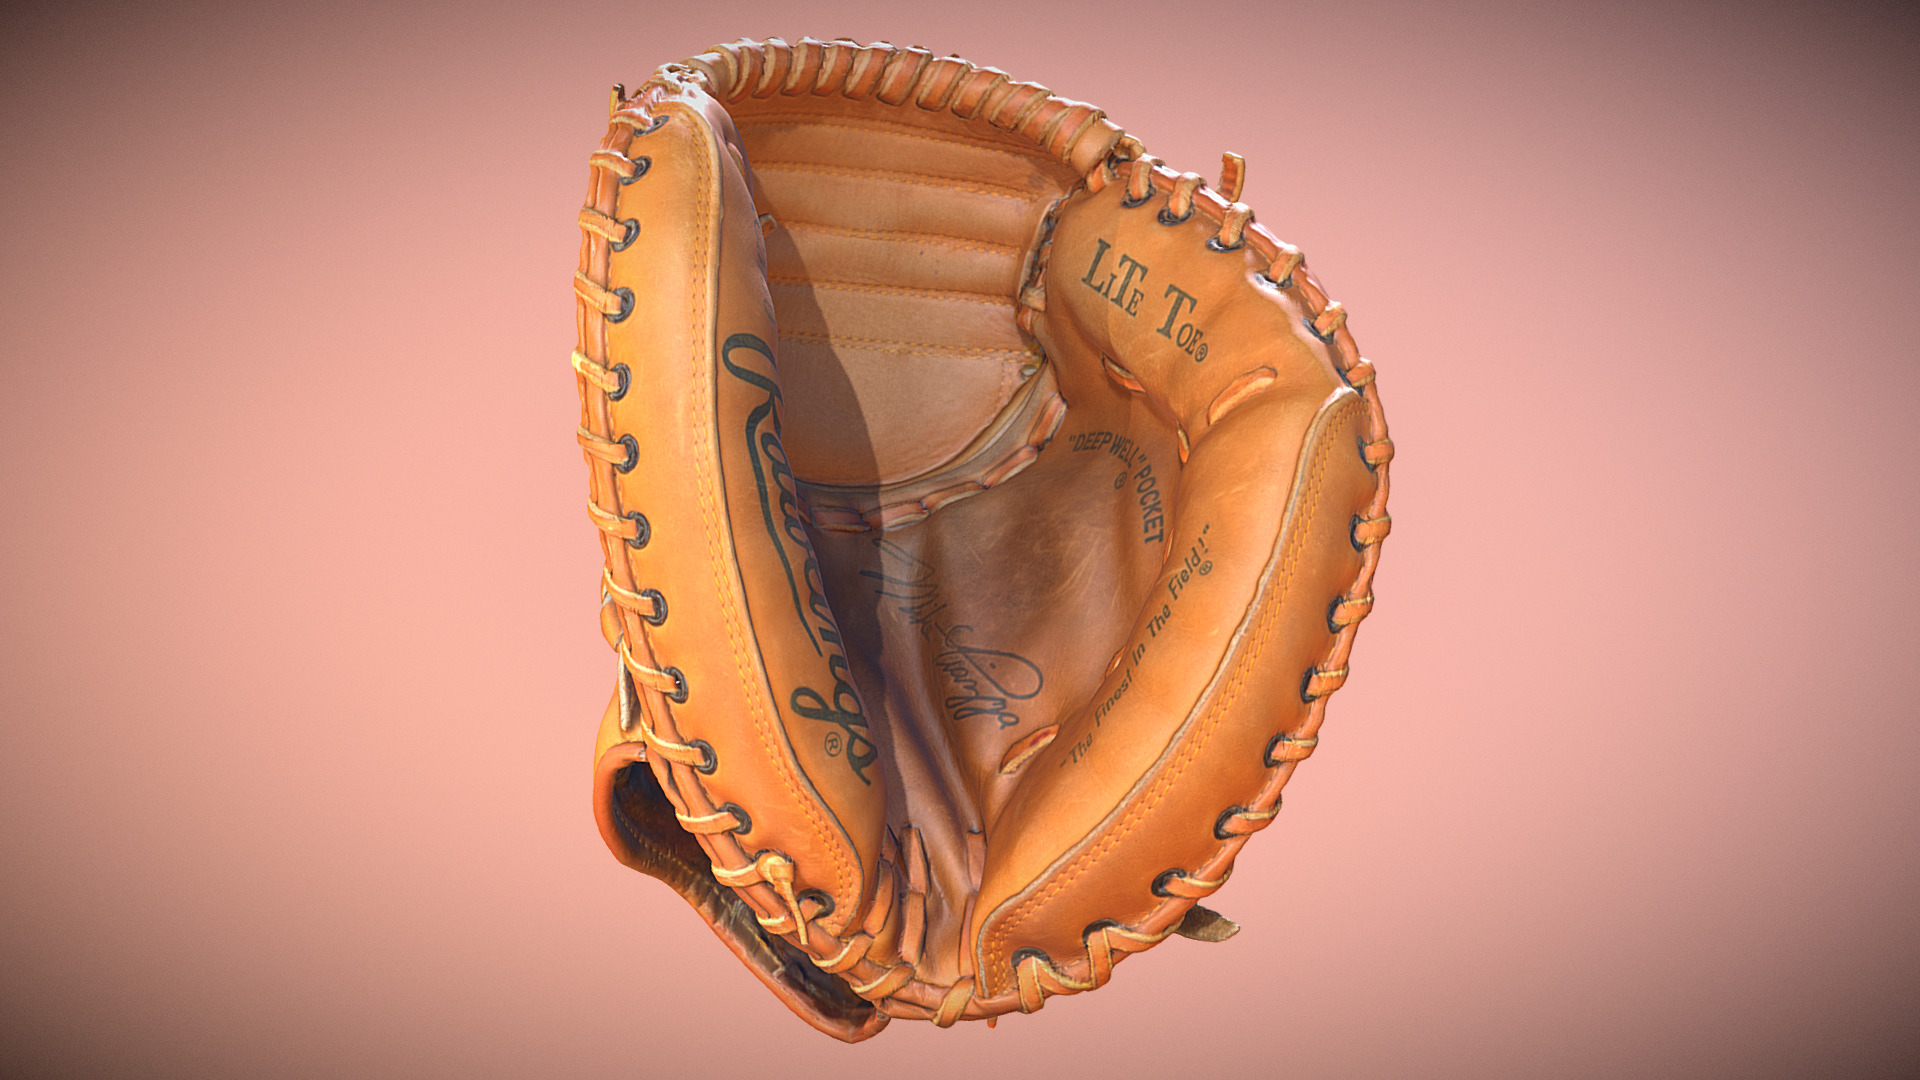 3D model Catcher’s Mitt - This is a 3D model of the Catcher's Mitt. The 3D model is about a baseball glove on a pink background.